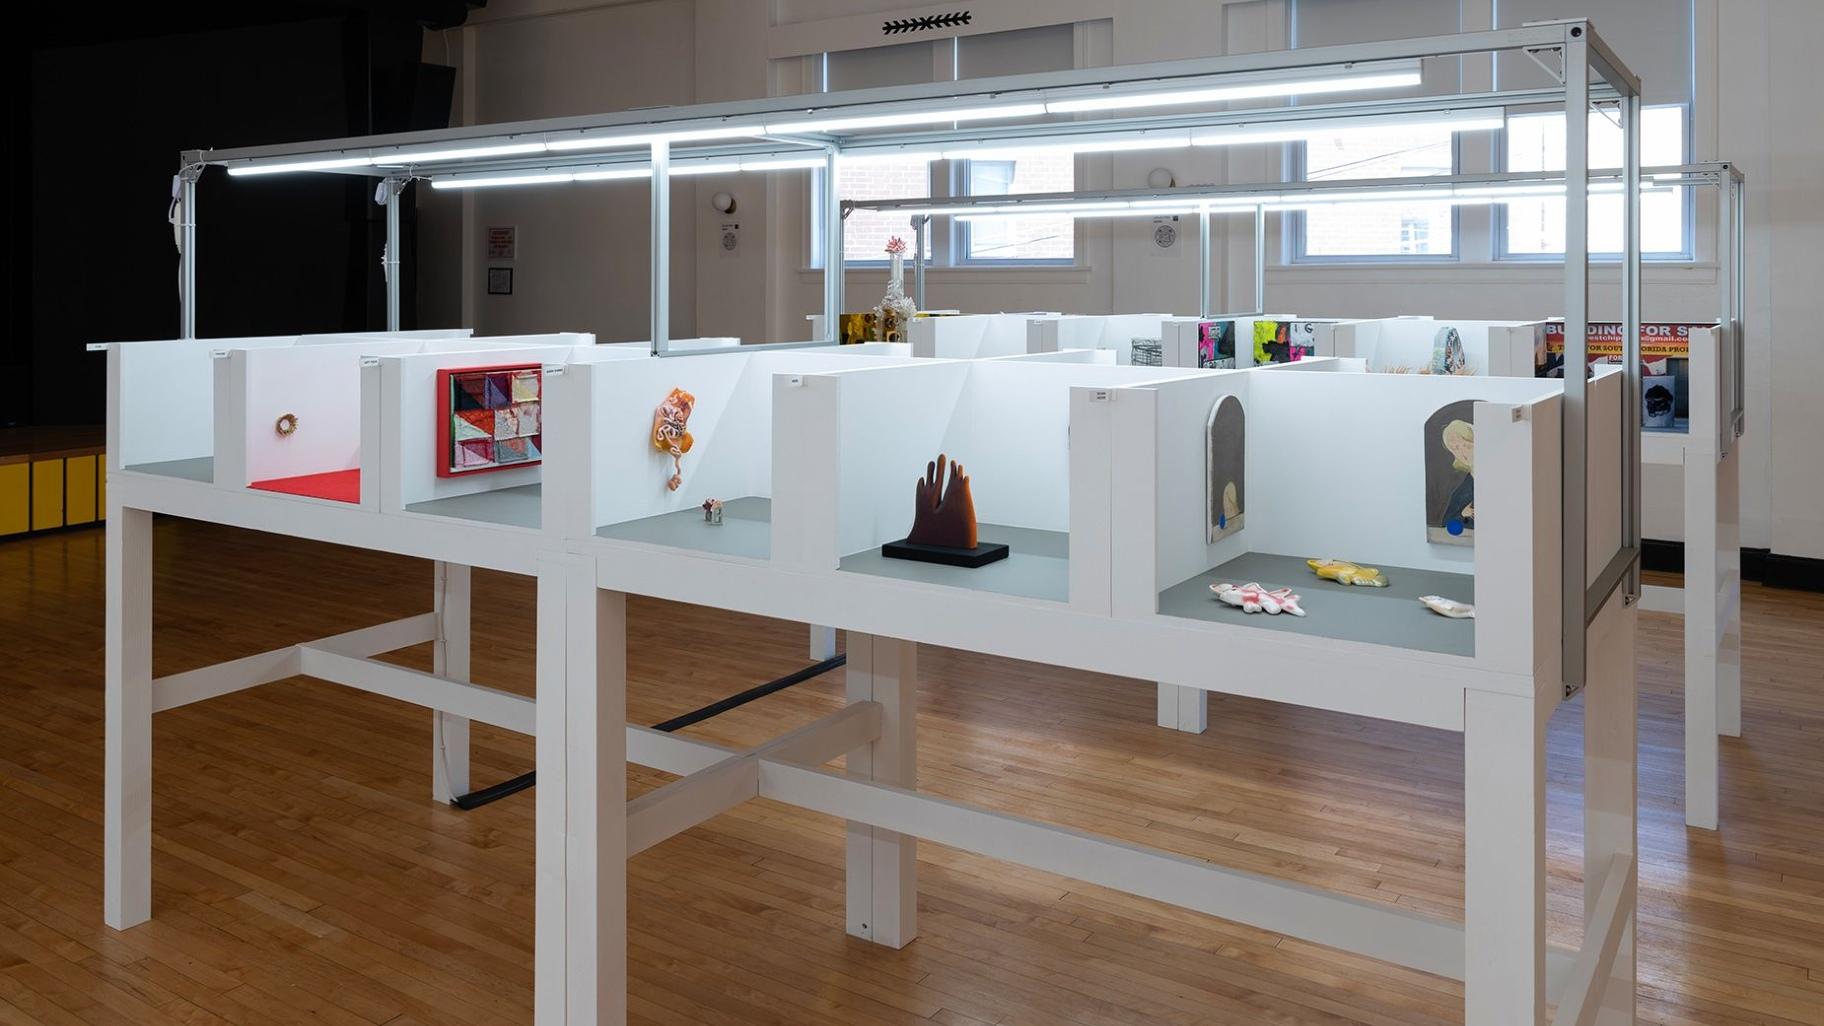 Barely Fair began as a joke between the co-founders of the artist space Julius Caesar, but they quickly realized its potential as a serious art fair. Pictured here are a selection of booths on display in 2023. (Roland Miller / Barely Fair via CNN Newsource)